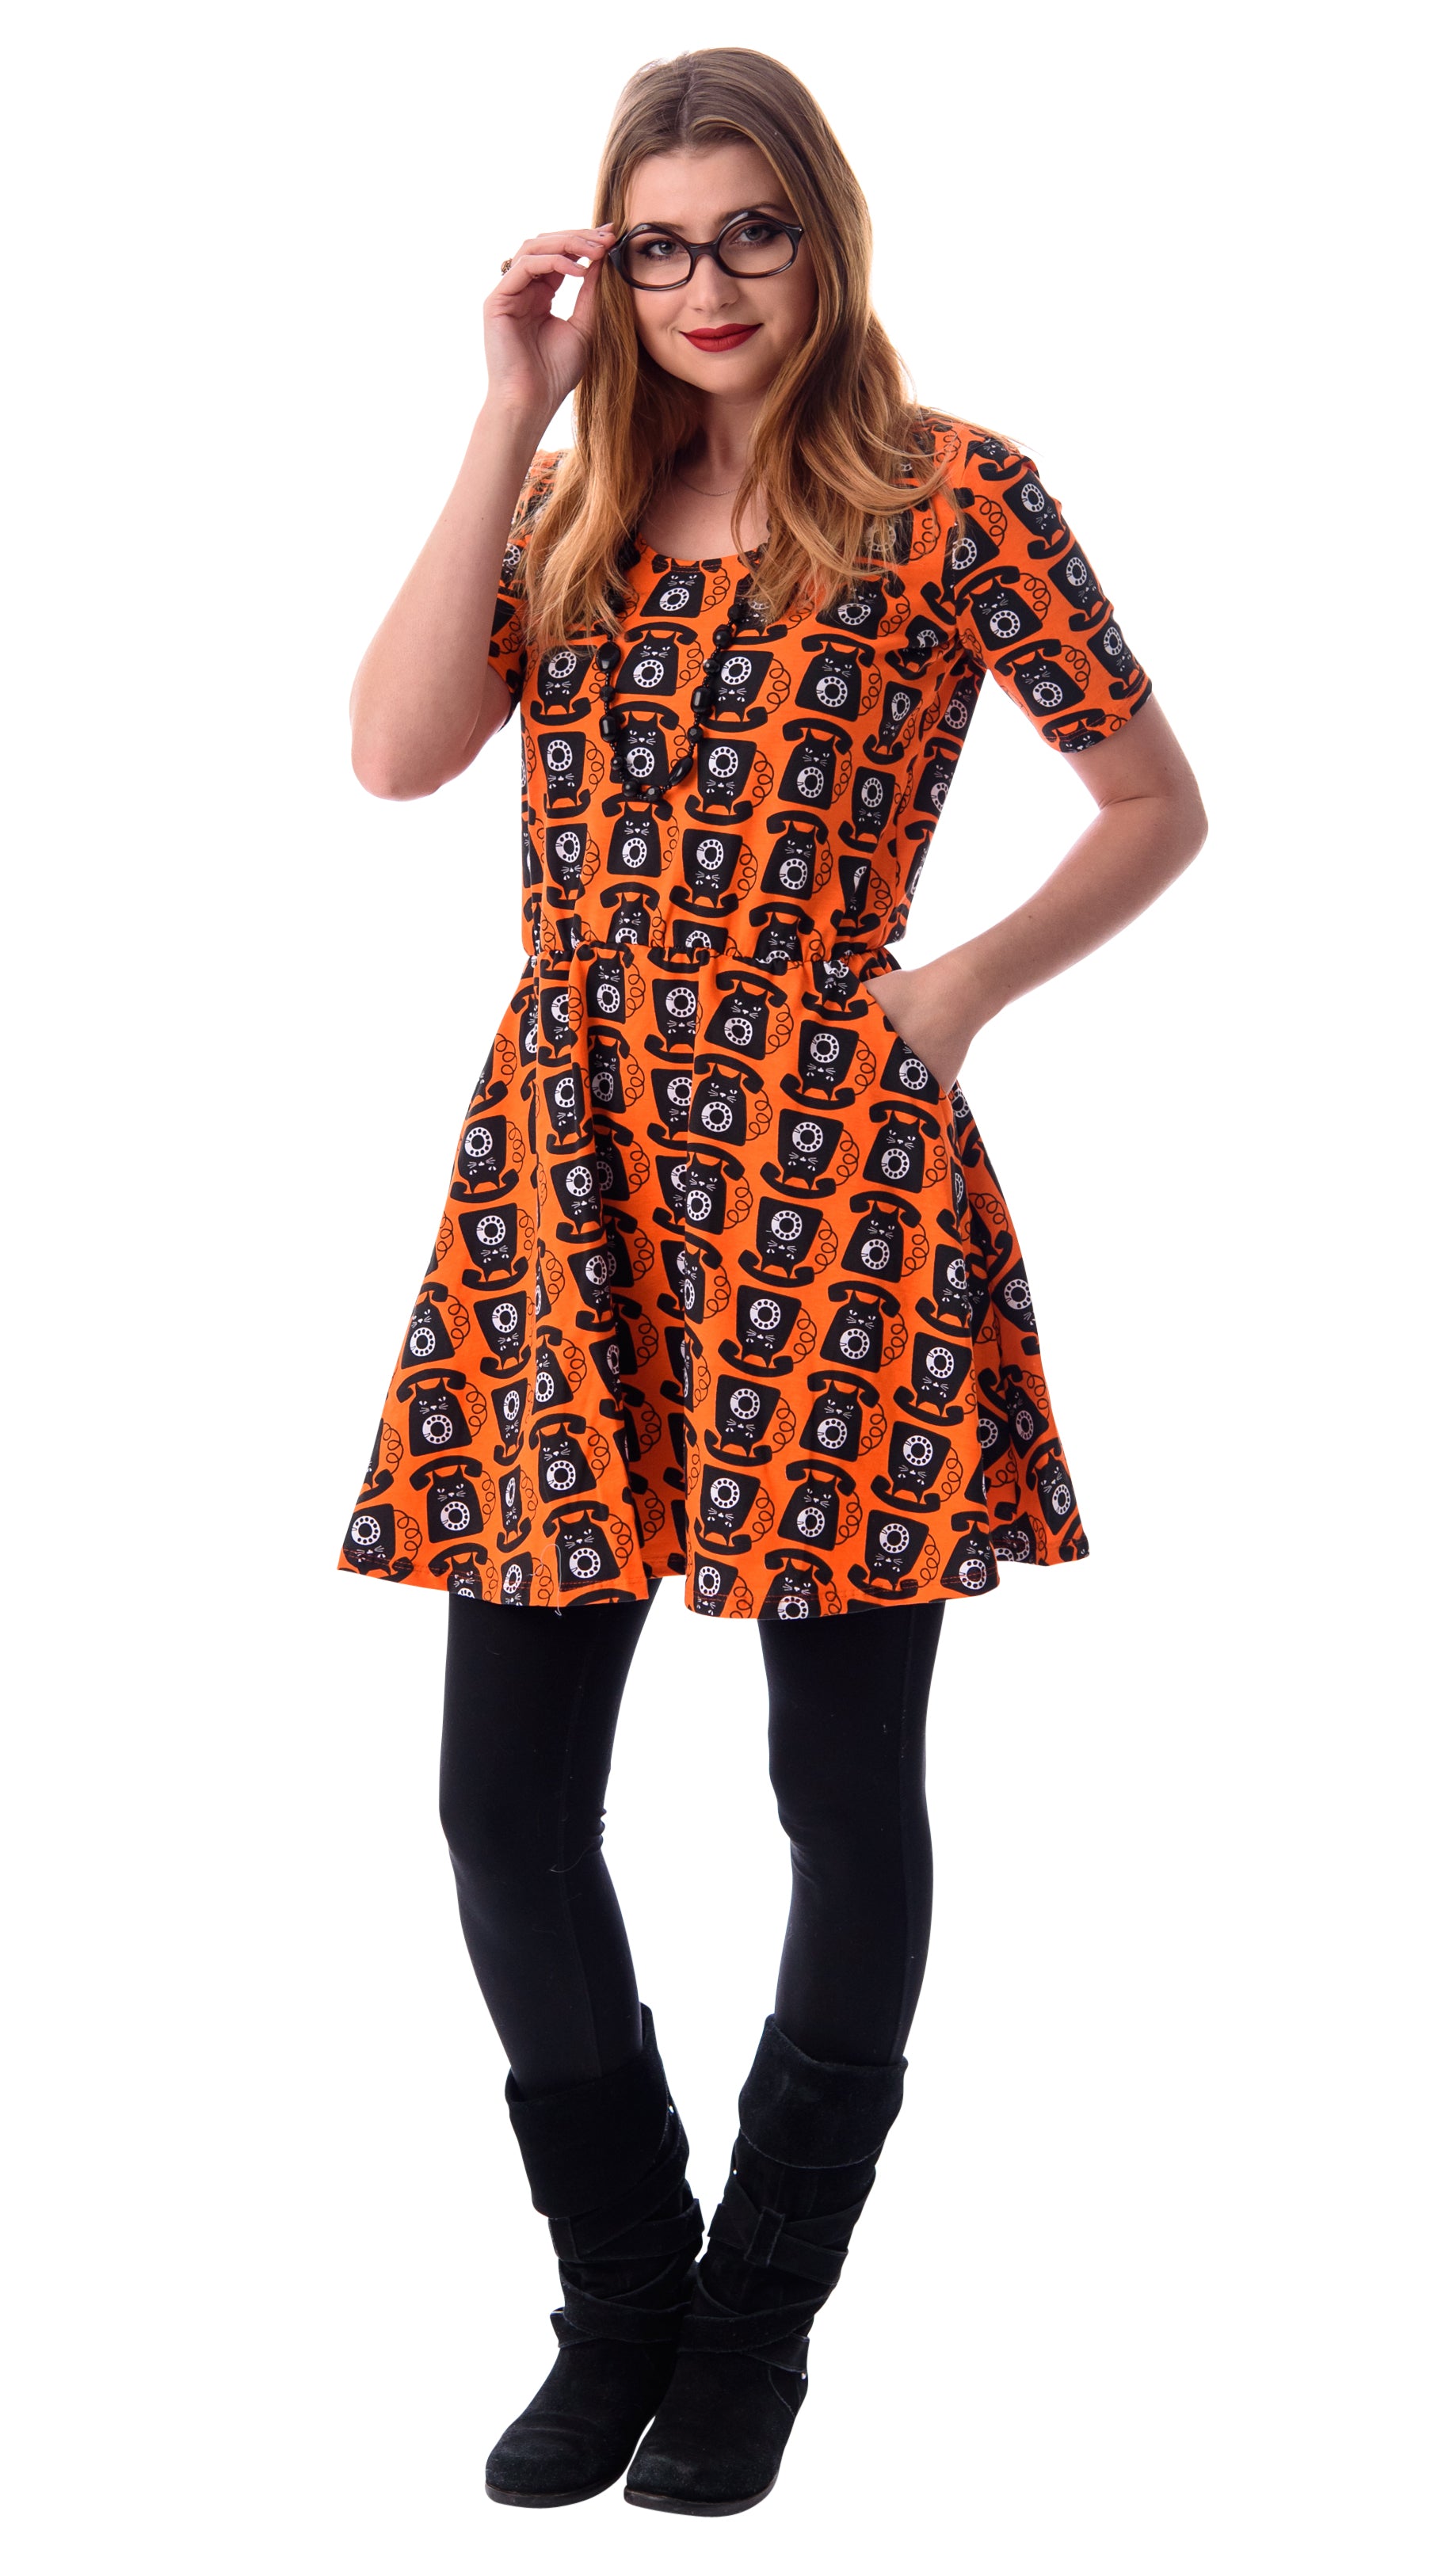 Orange black and white cat phone print knit skater dress with elbow length sleeves, pockets and elastic waist